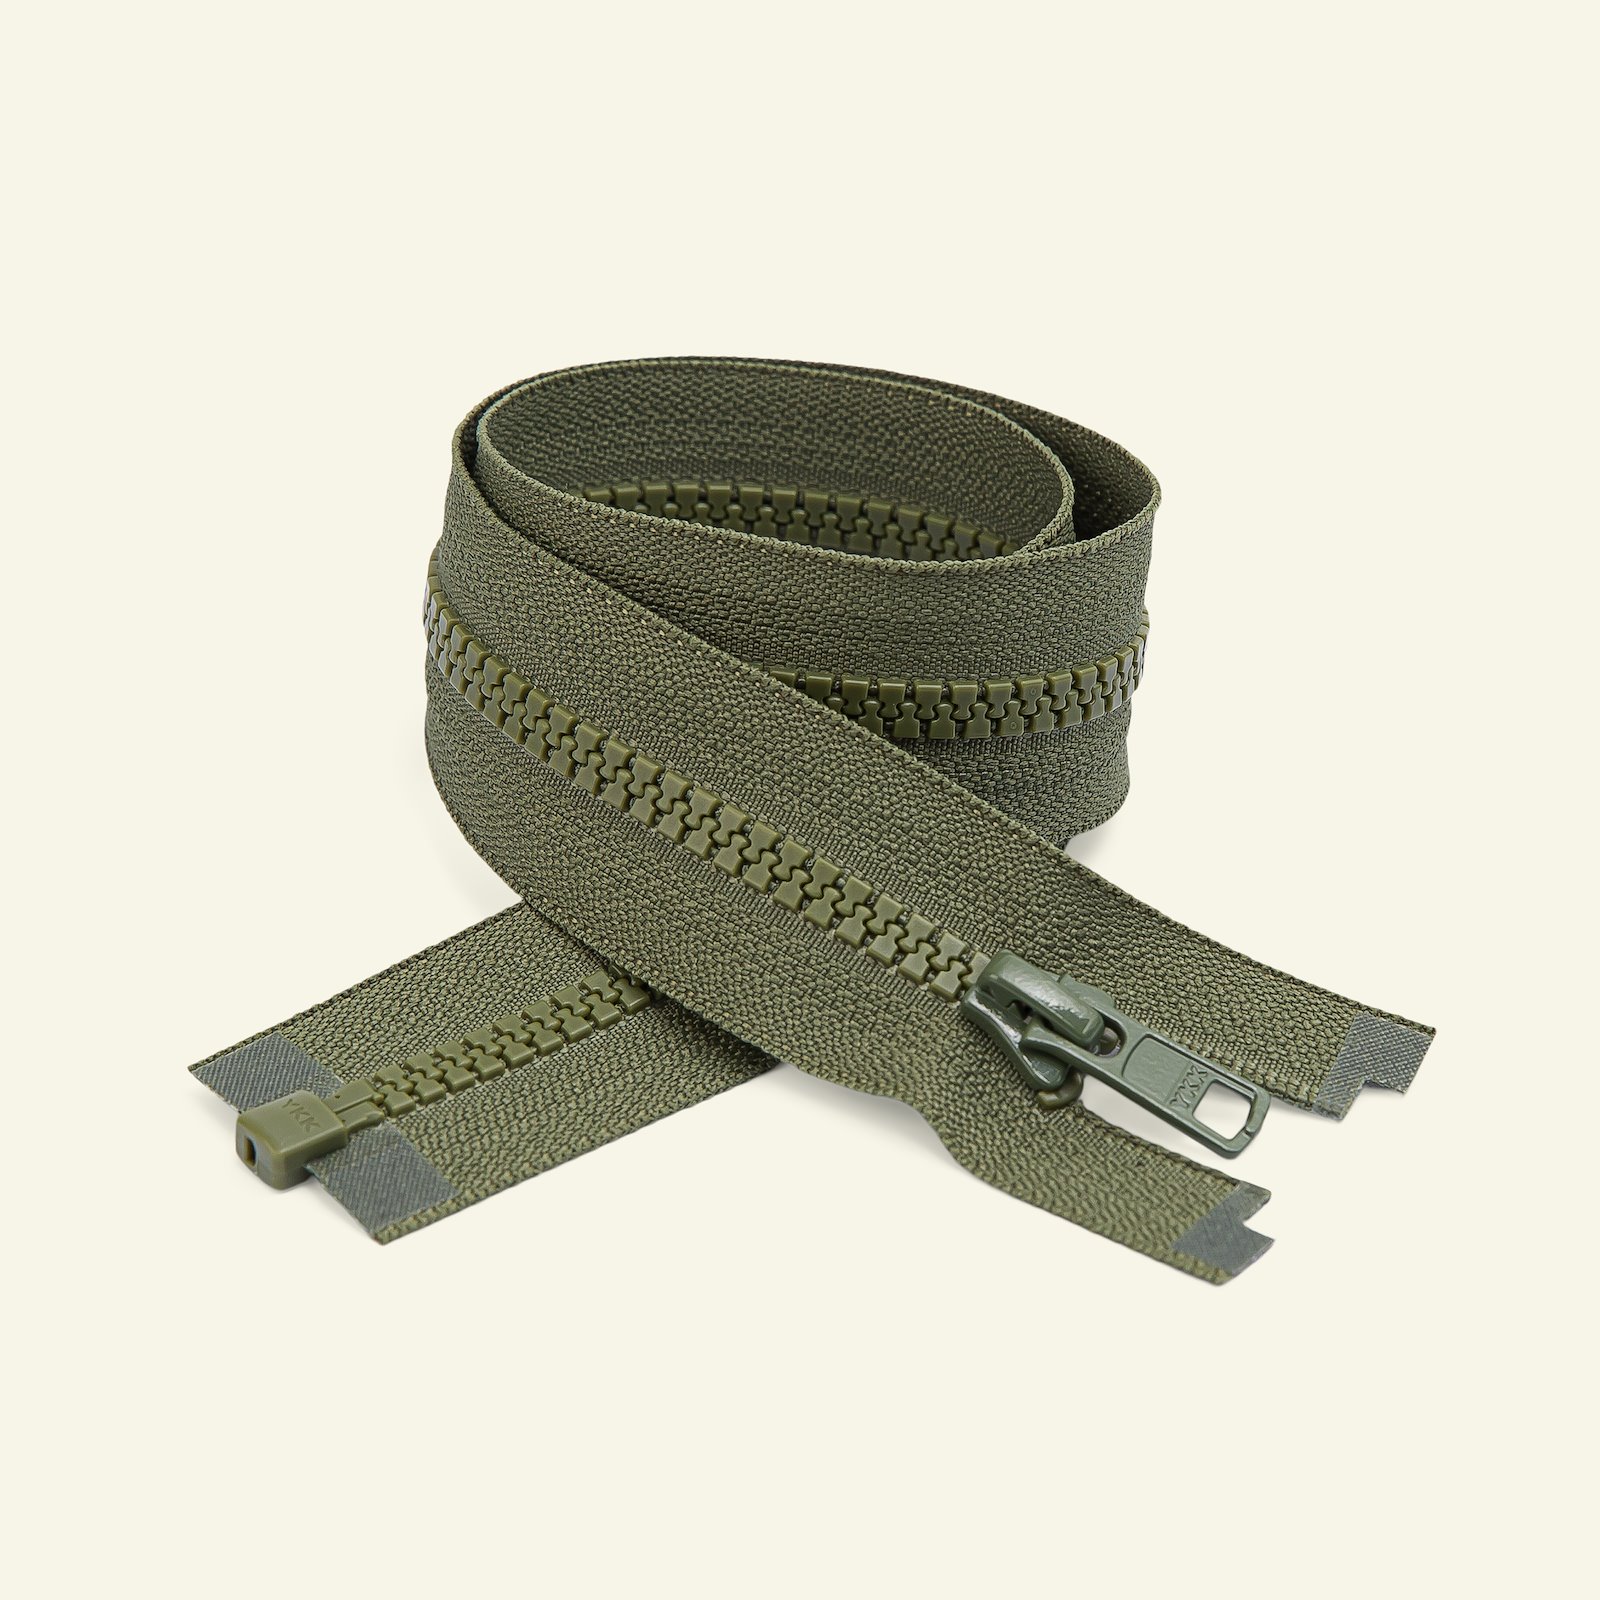 YKK zip 6mm open end 40cm army x50033_pack